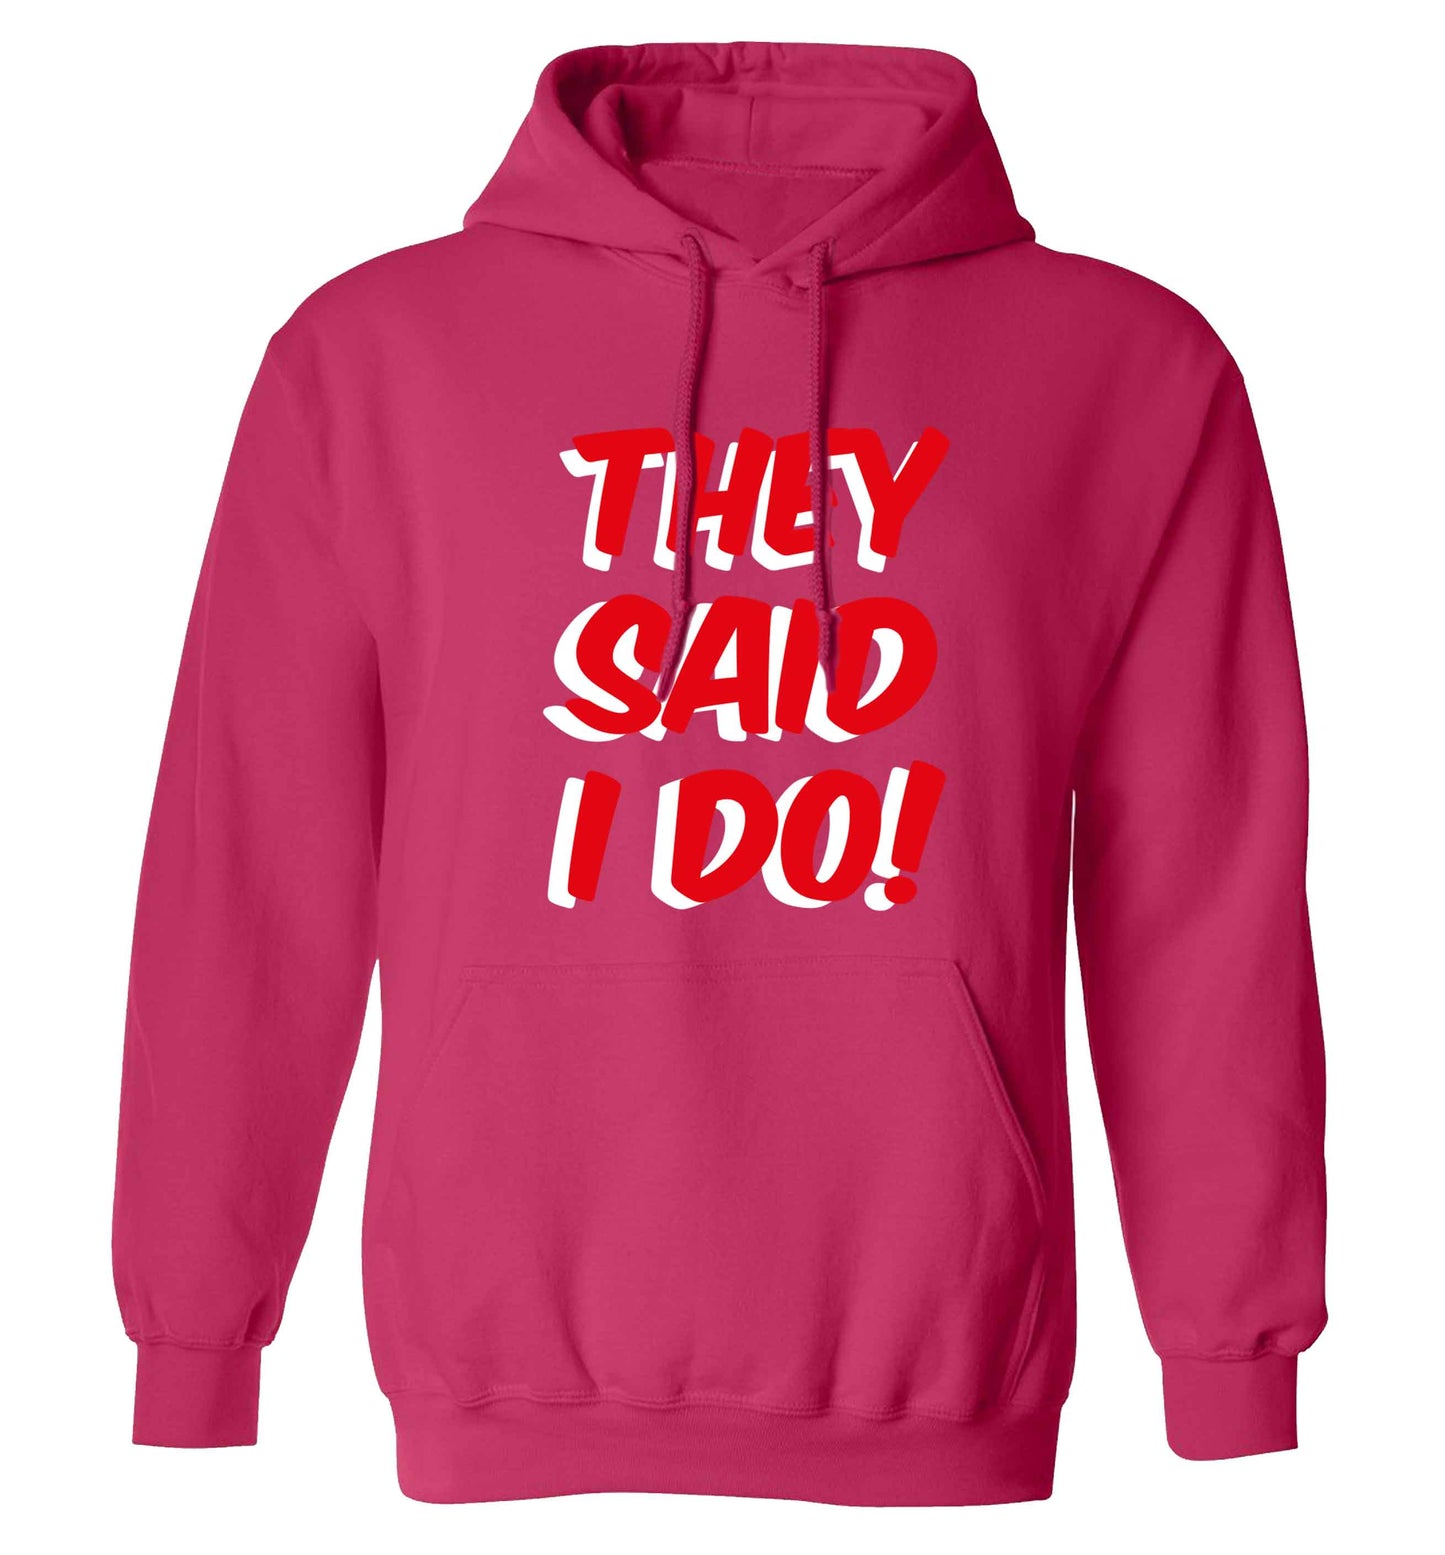 They said I do adults unisex pink hoodie 2XL